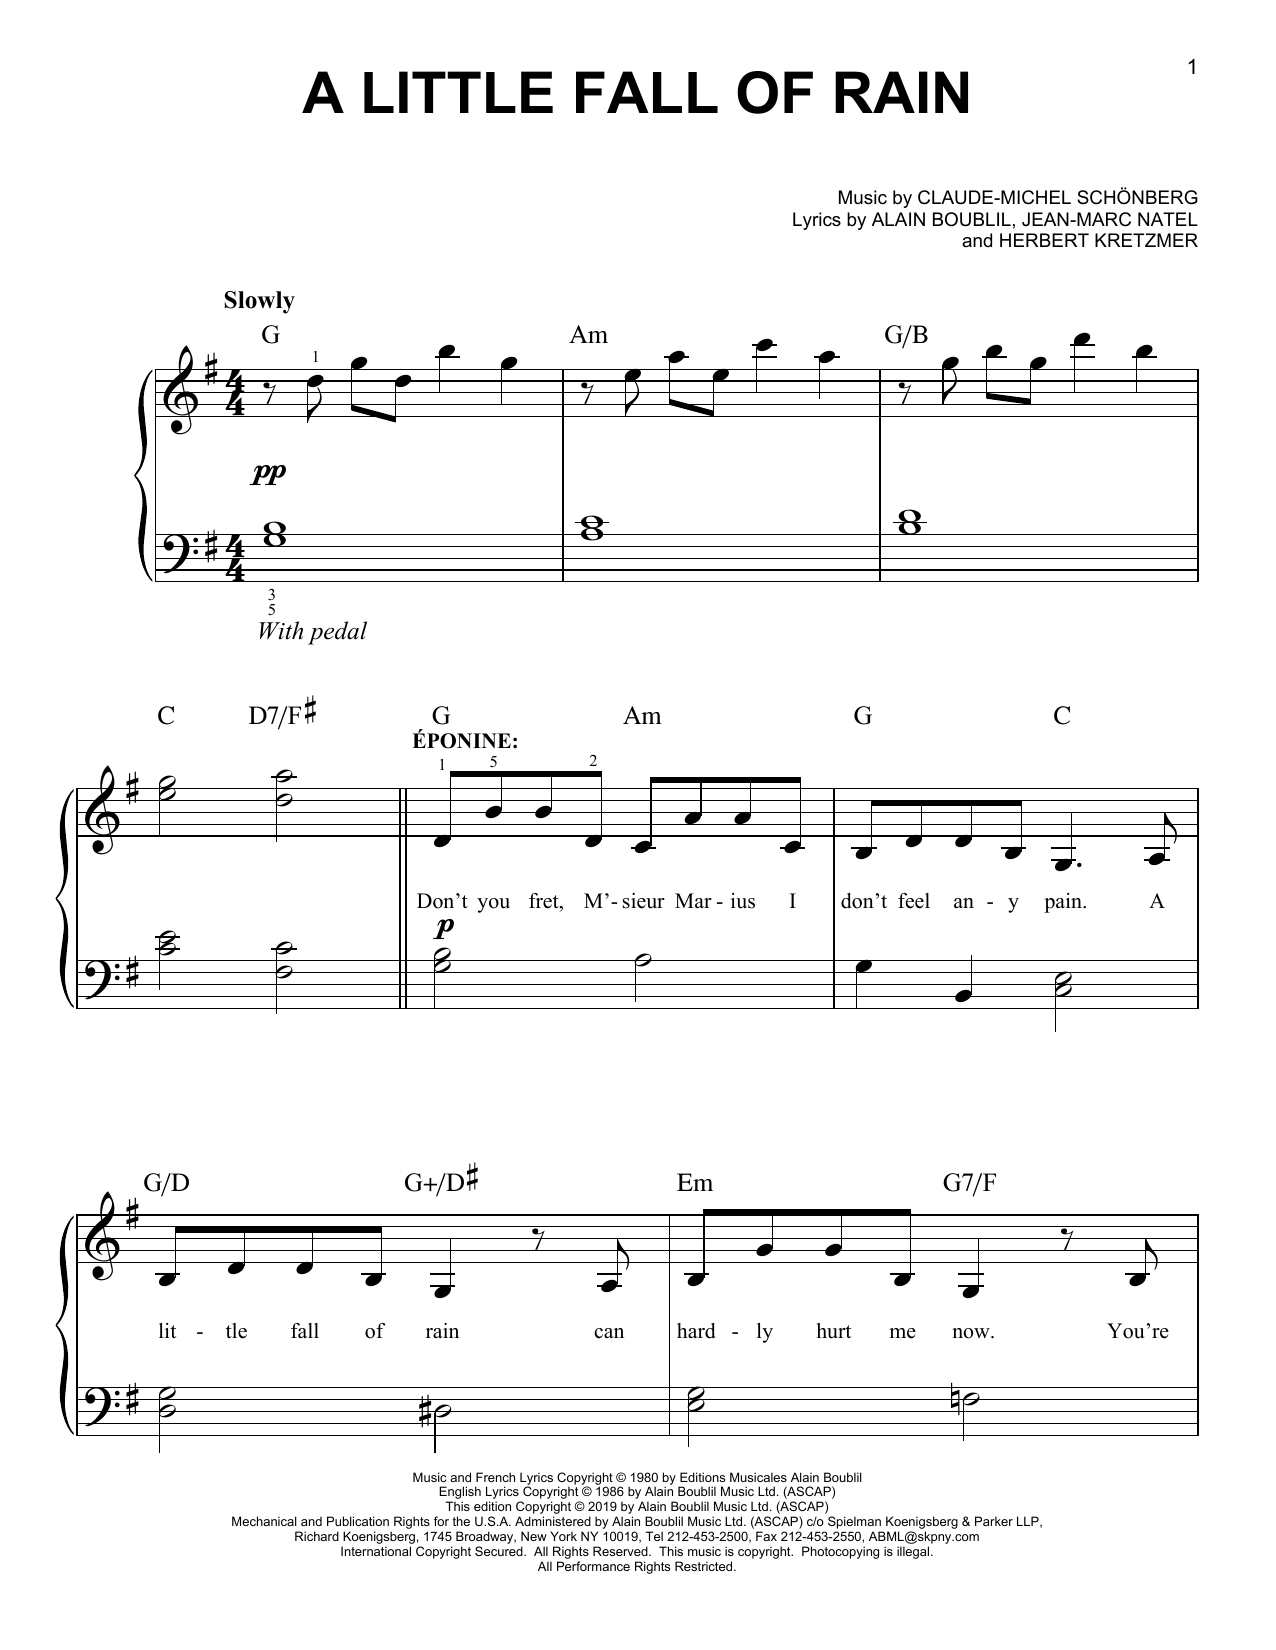 Claude-Michel Schonberg A Little Fall Of Rain sheet music notes and chords. Download Printable PDF.